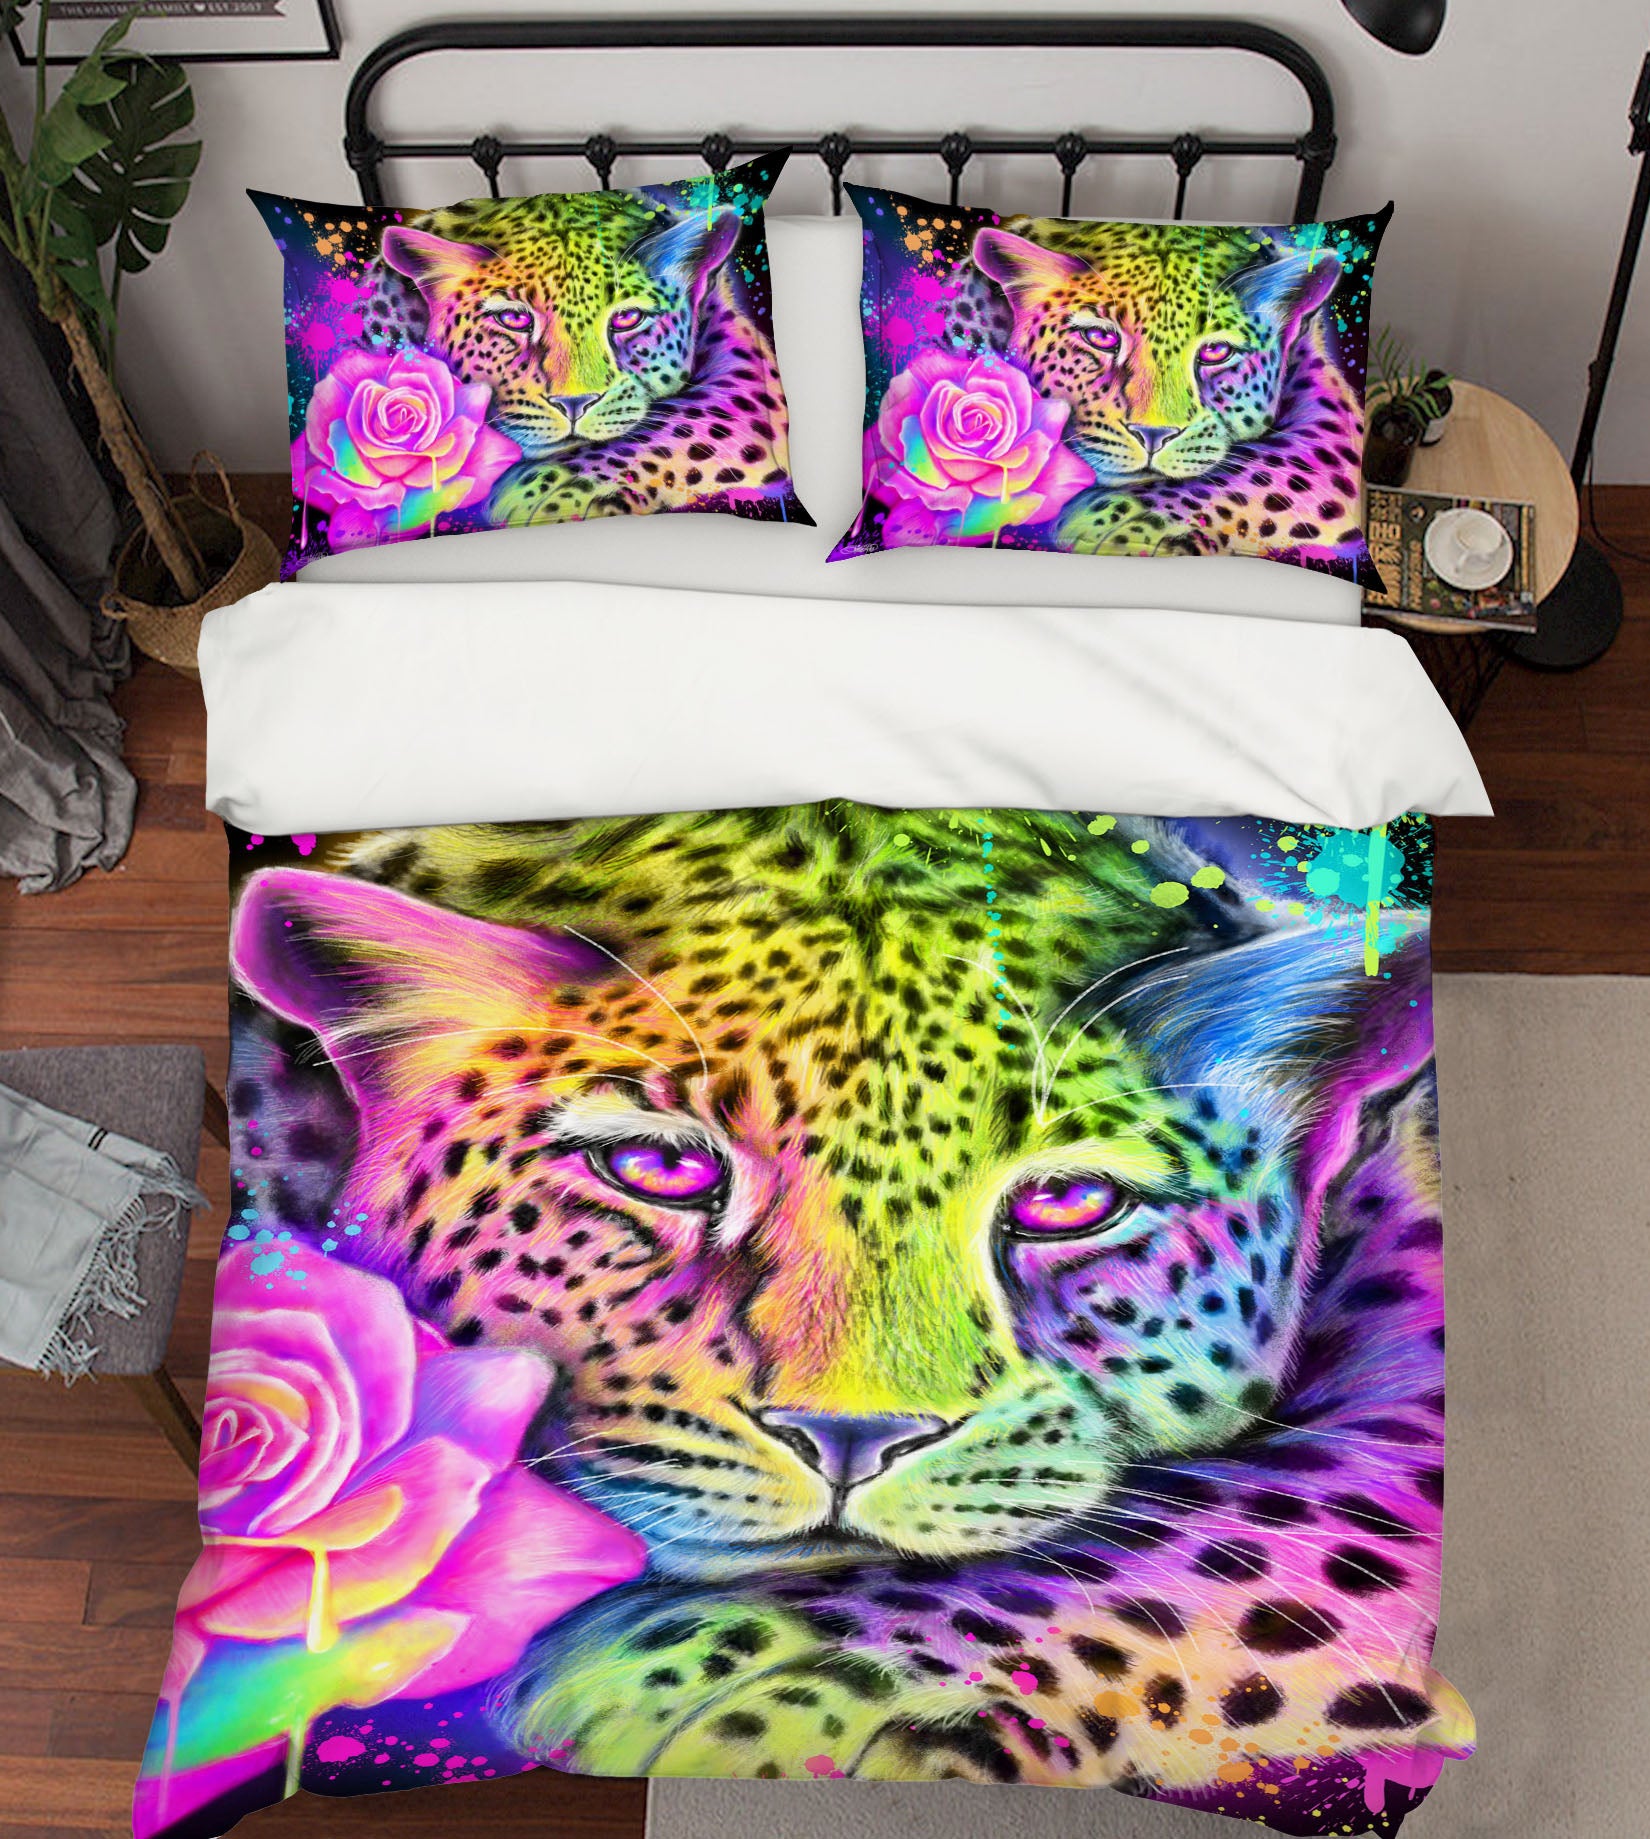 3D Red Rose Leopard 8577 Sheena Pike Bedding Bed Pillowcases Quilt Cover Duvet Cover